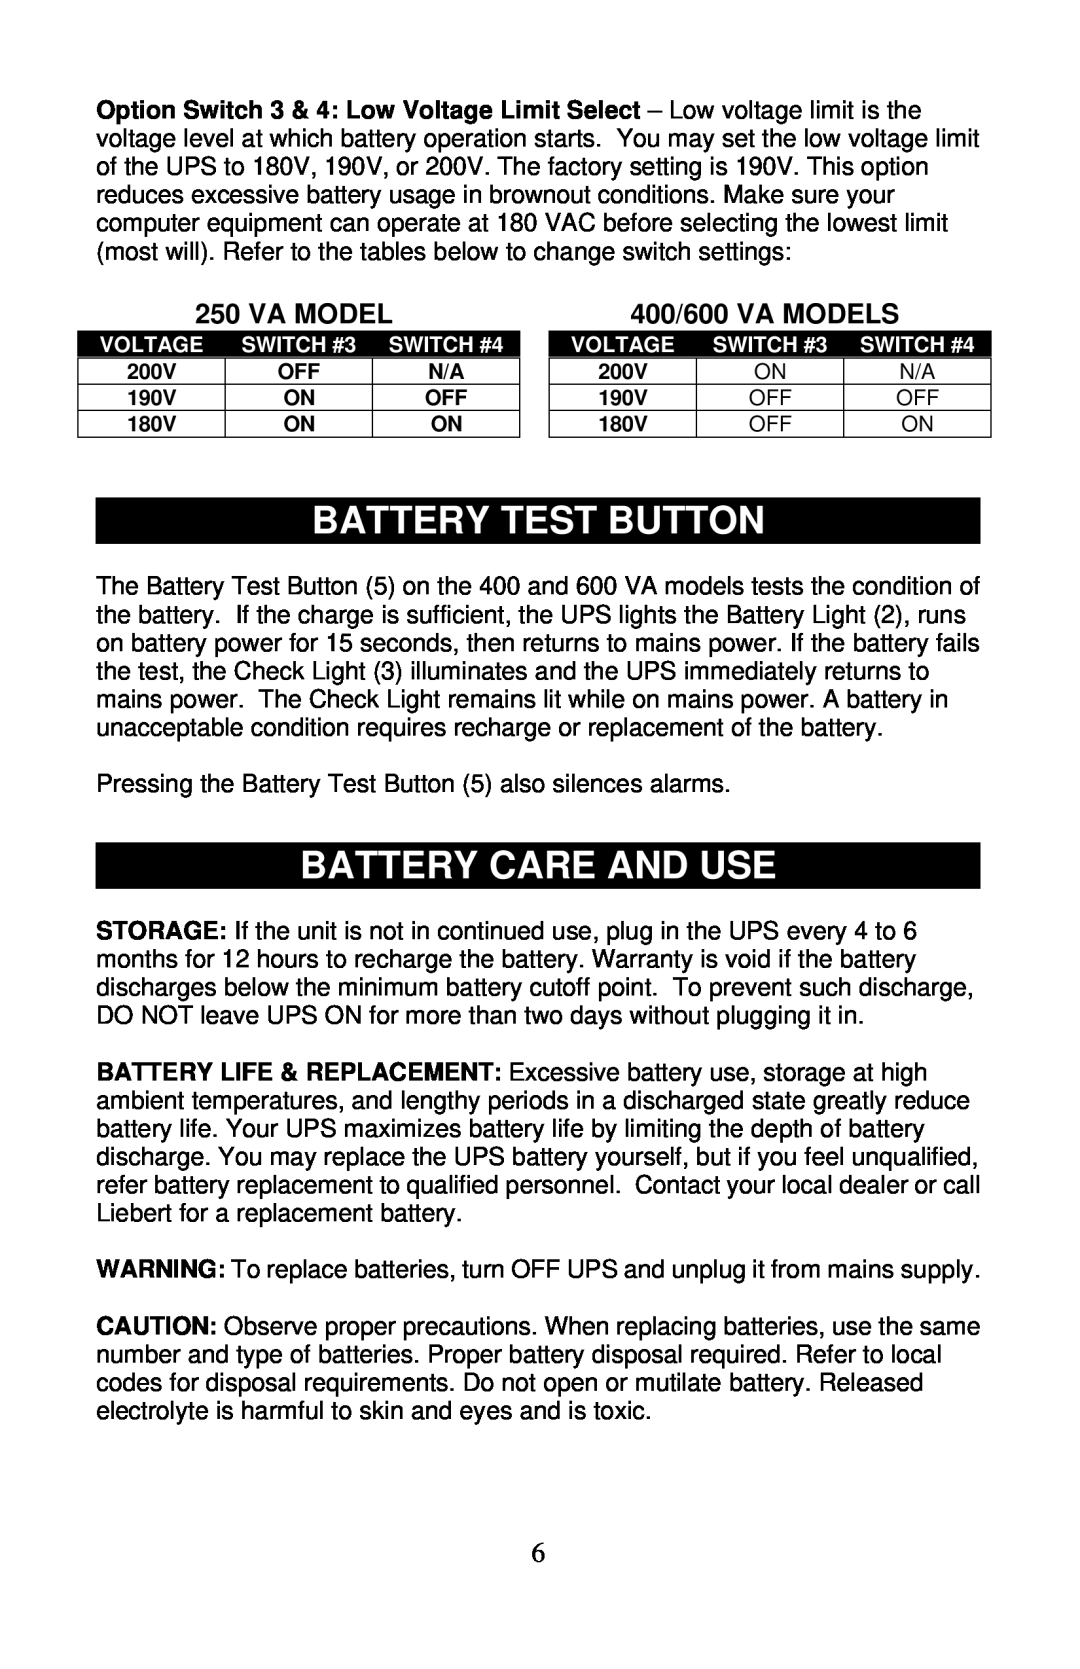 Liebert PS250-50S, PS400-50S, PS600-50S user manual Battery Test Button, Battery Care And Use, Va Model, 400/600 VA MODELS 